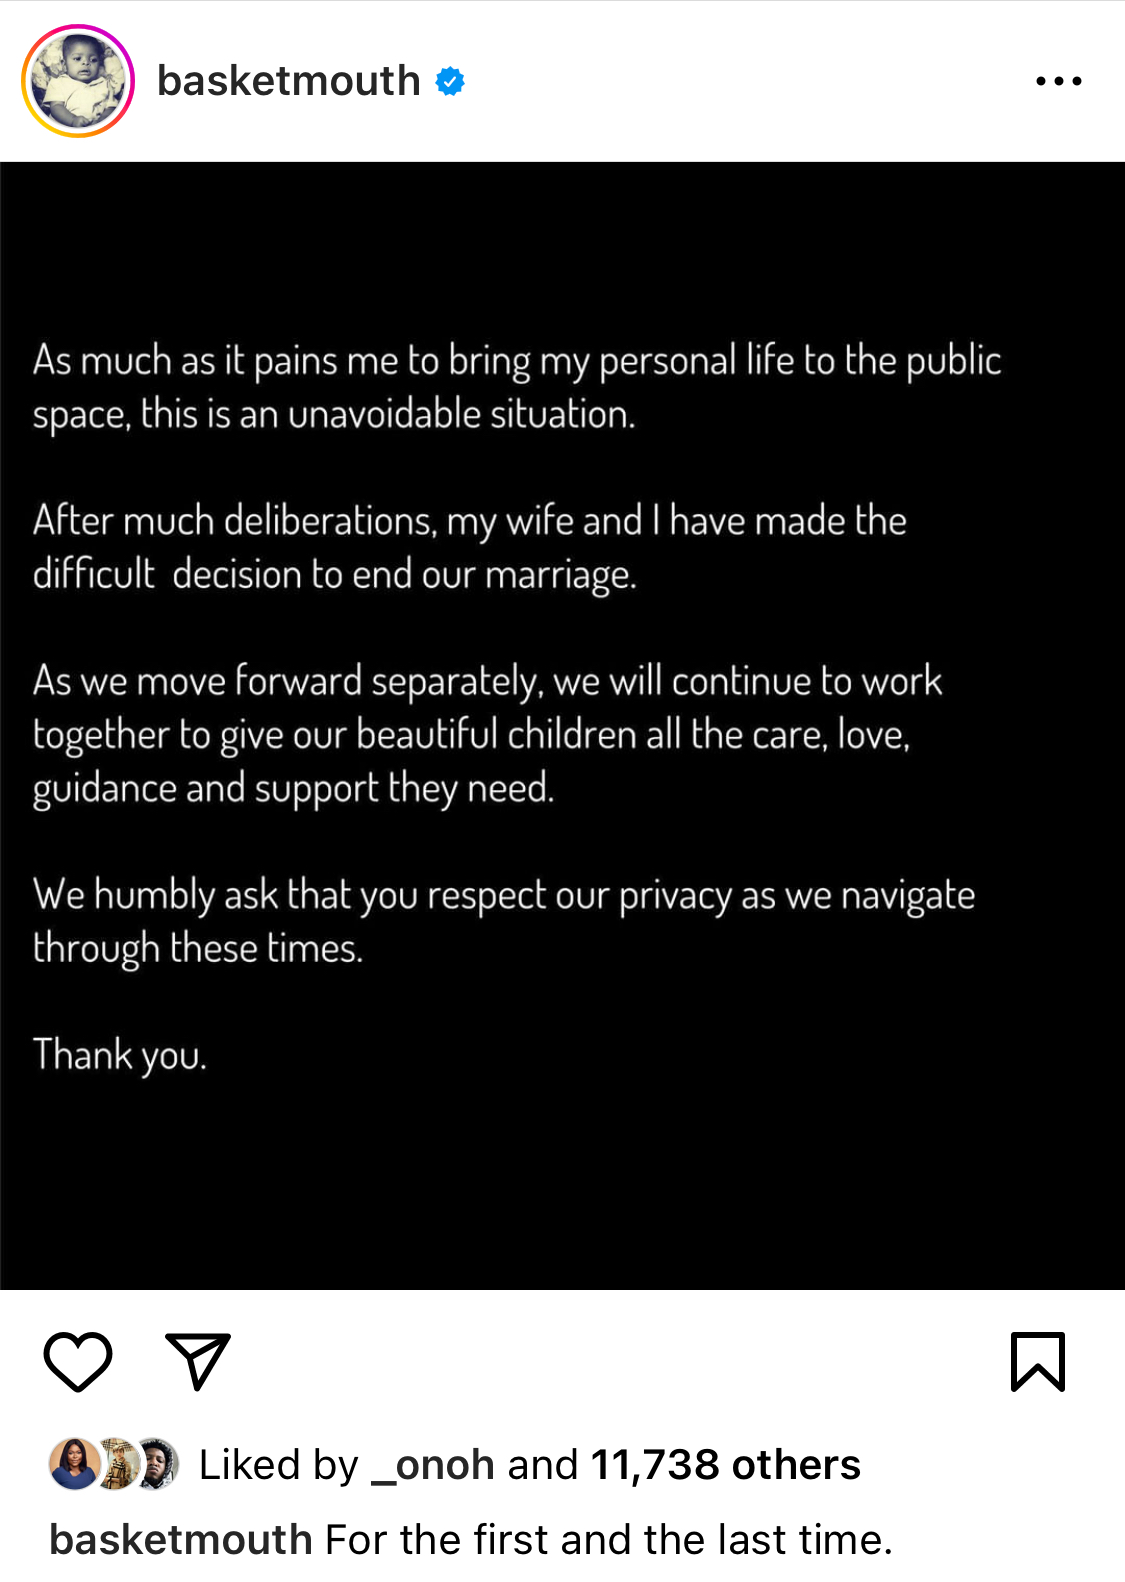 My wife and I have decided to end our marriage - Comedian Basketmouth reveals